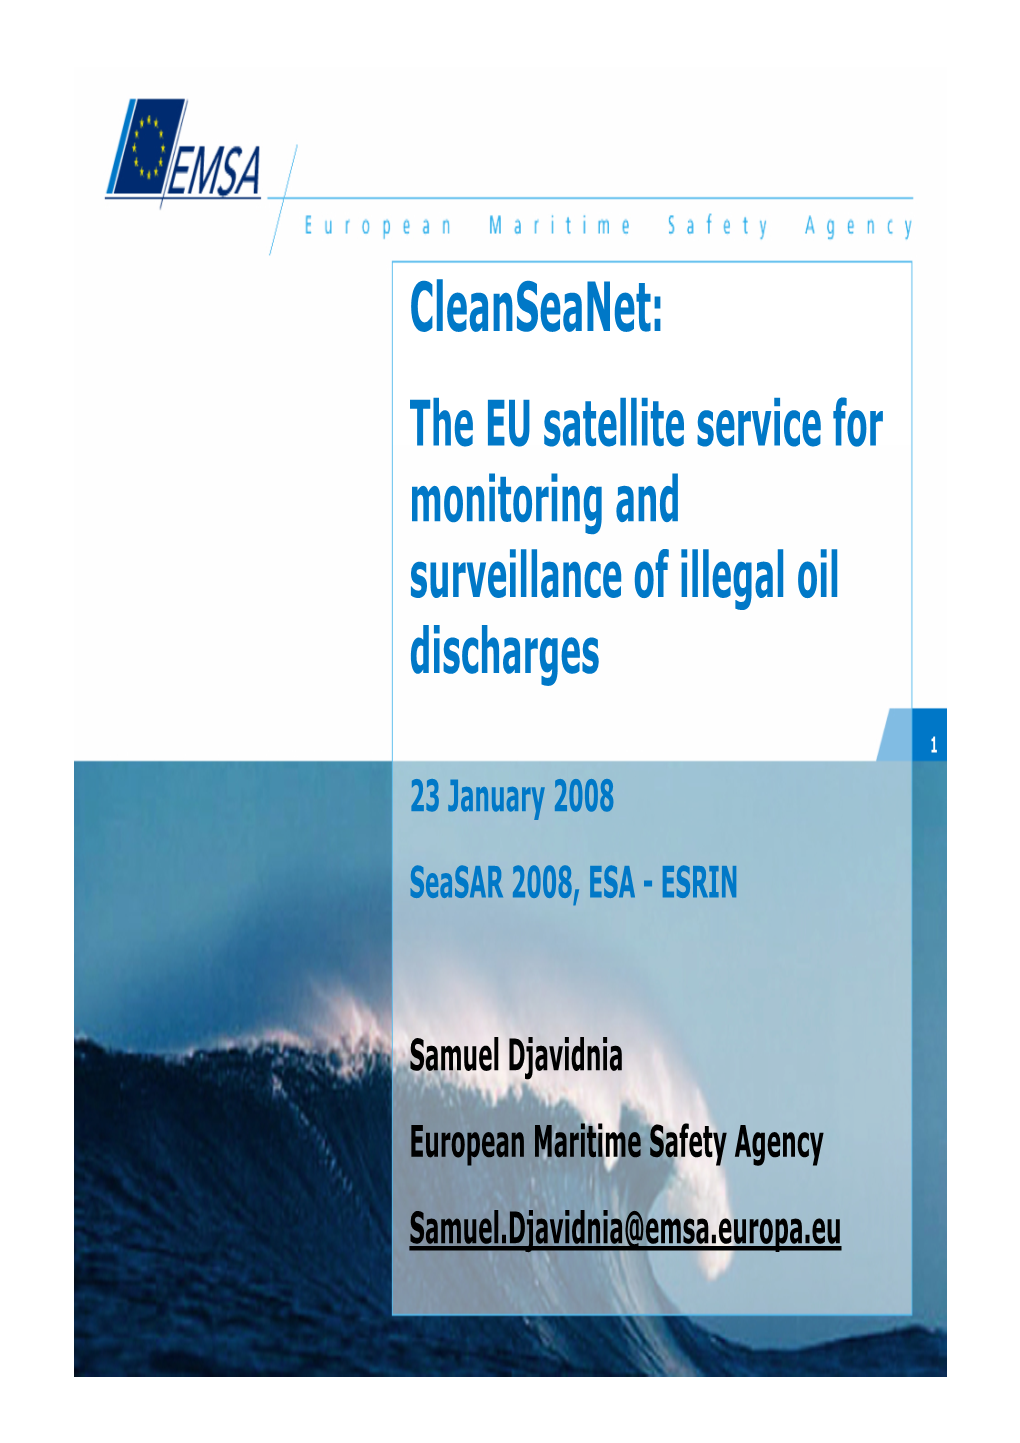 Cleanseanet: the EU Satellite Service for Monitoring and Surveillance of Illegal Oil Discharges